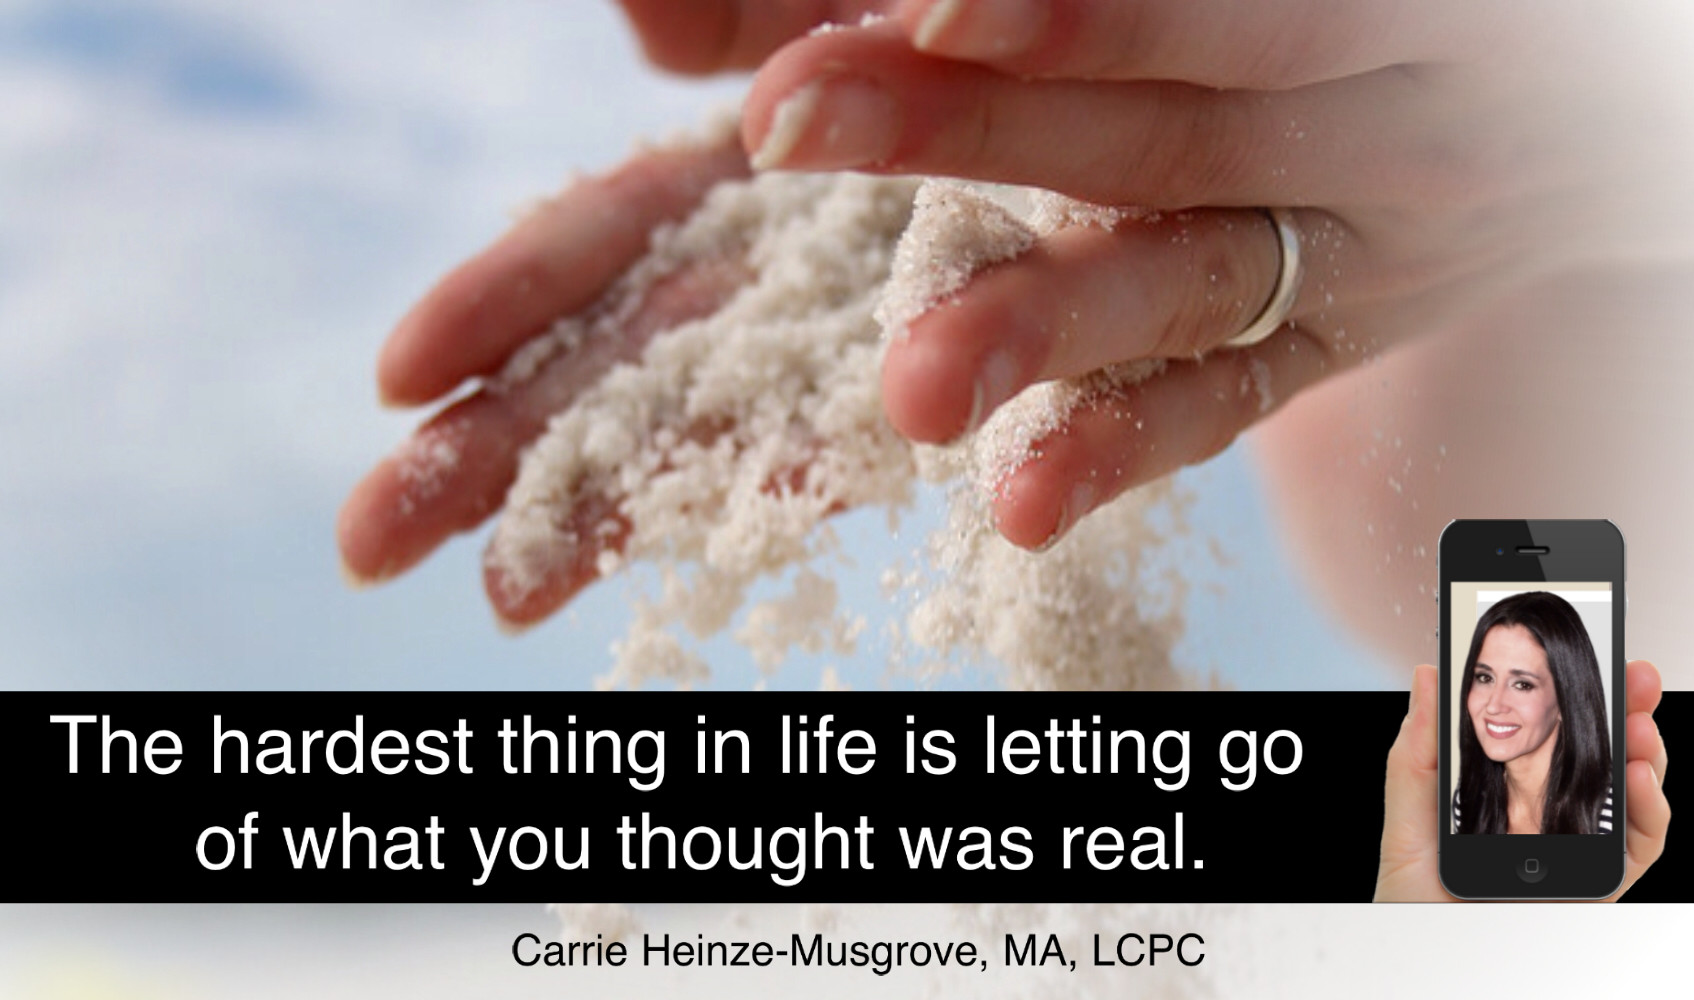 Letting go of what you thought was real.